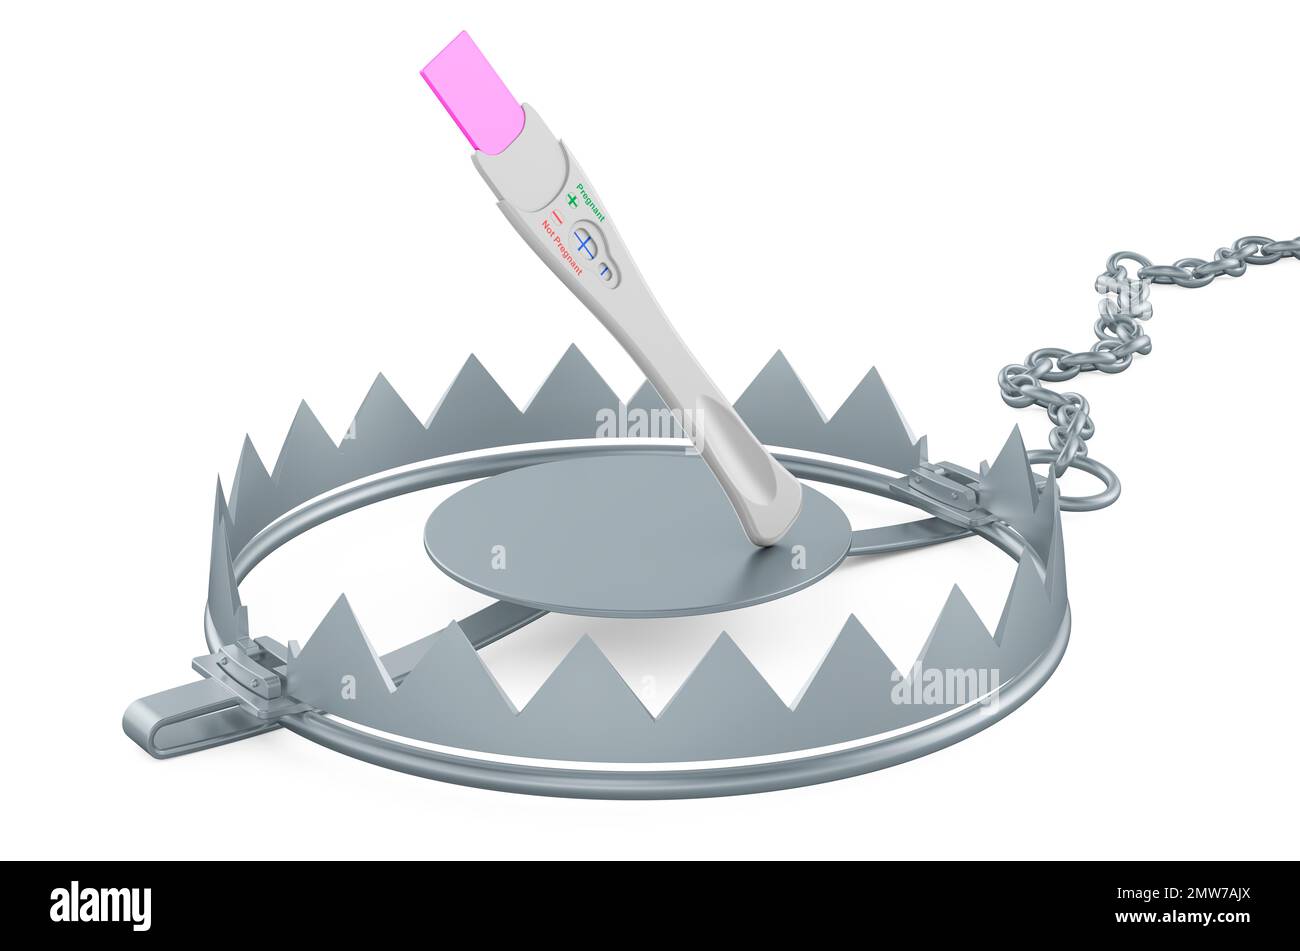 Pregnancy test positive inside bear trap, 3D rendering isolated on white background Stock Photo